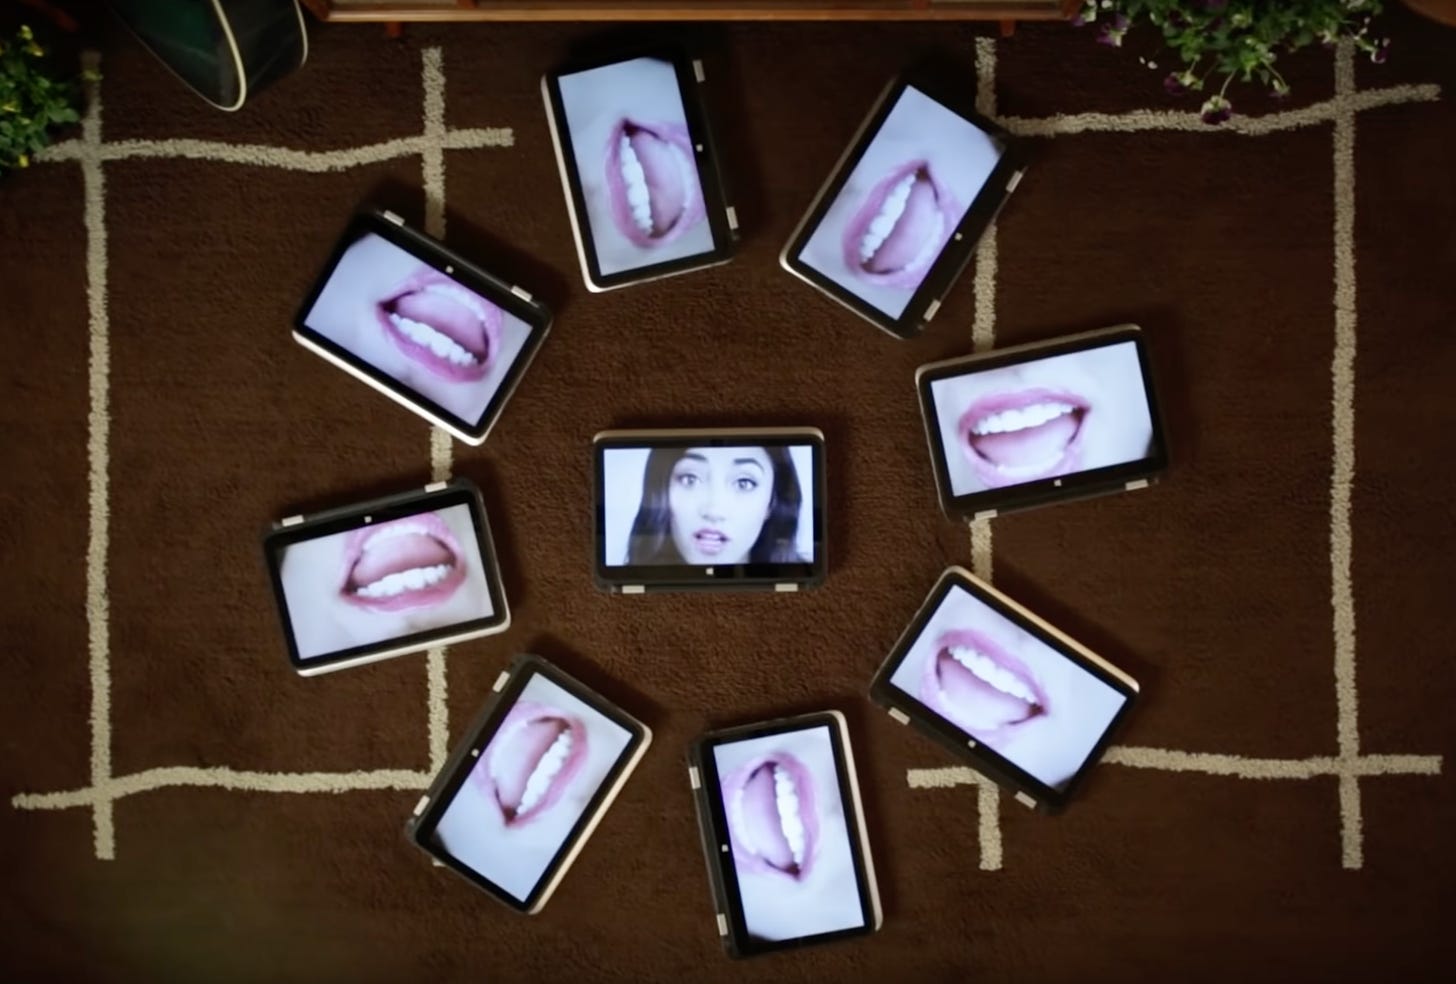 Several HP tablets arranged in a circle. All the external tablets have incredibly close up images of a mouth. A single tablet in the middle has an image of a brown haired girl looking doe-eyed.